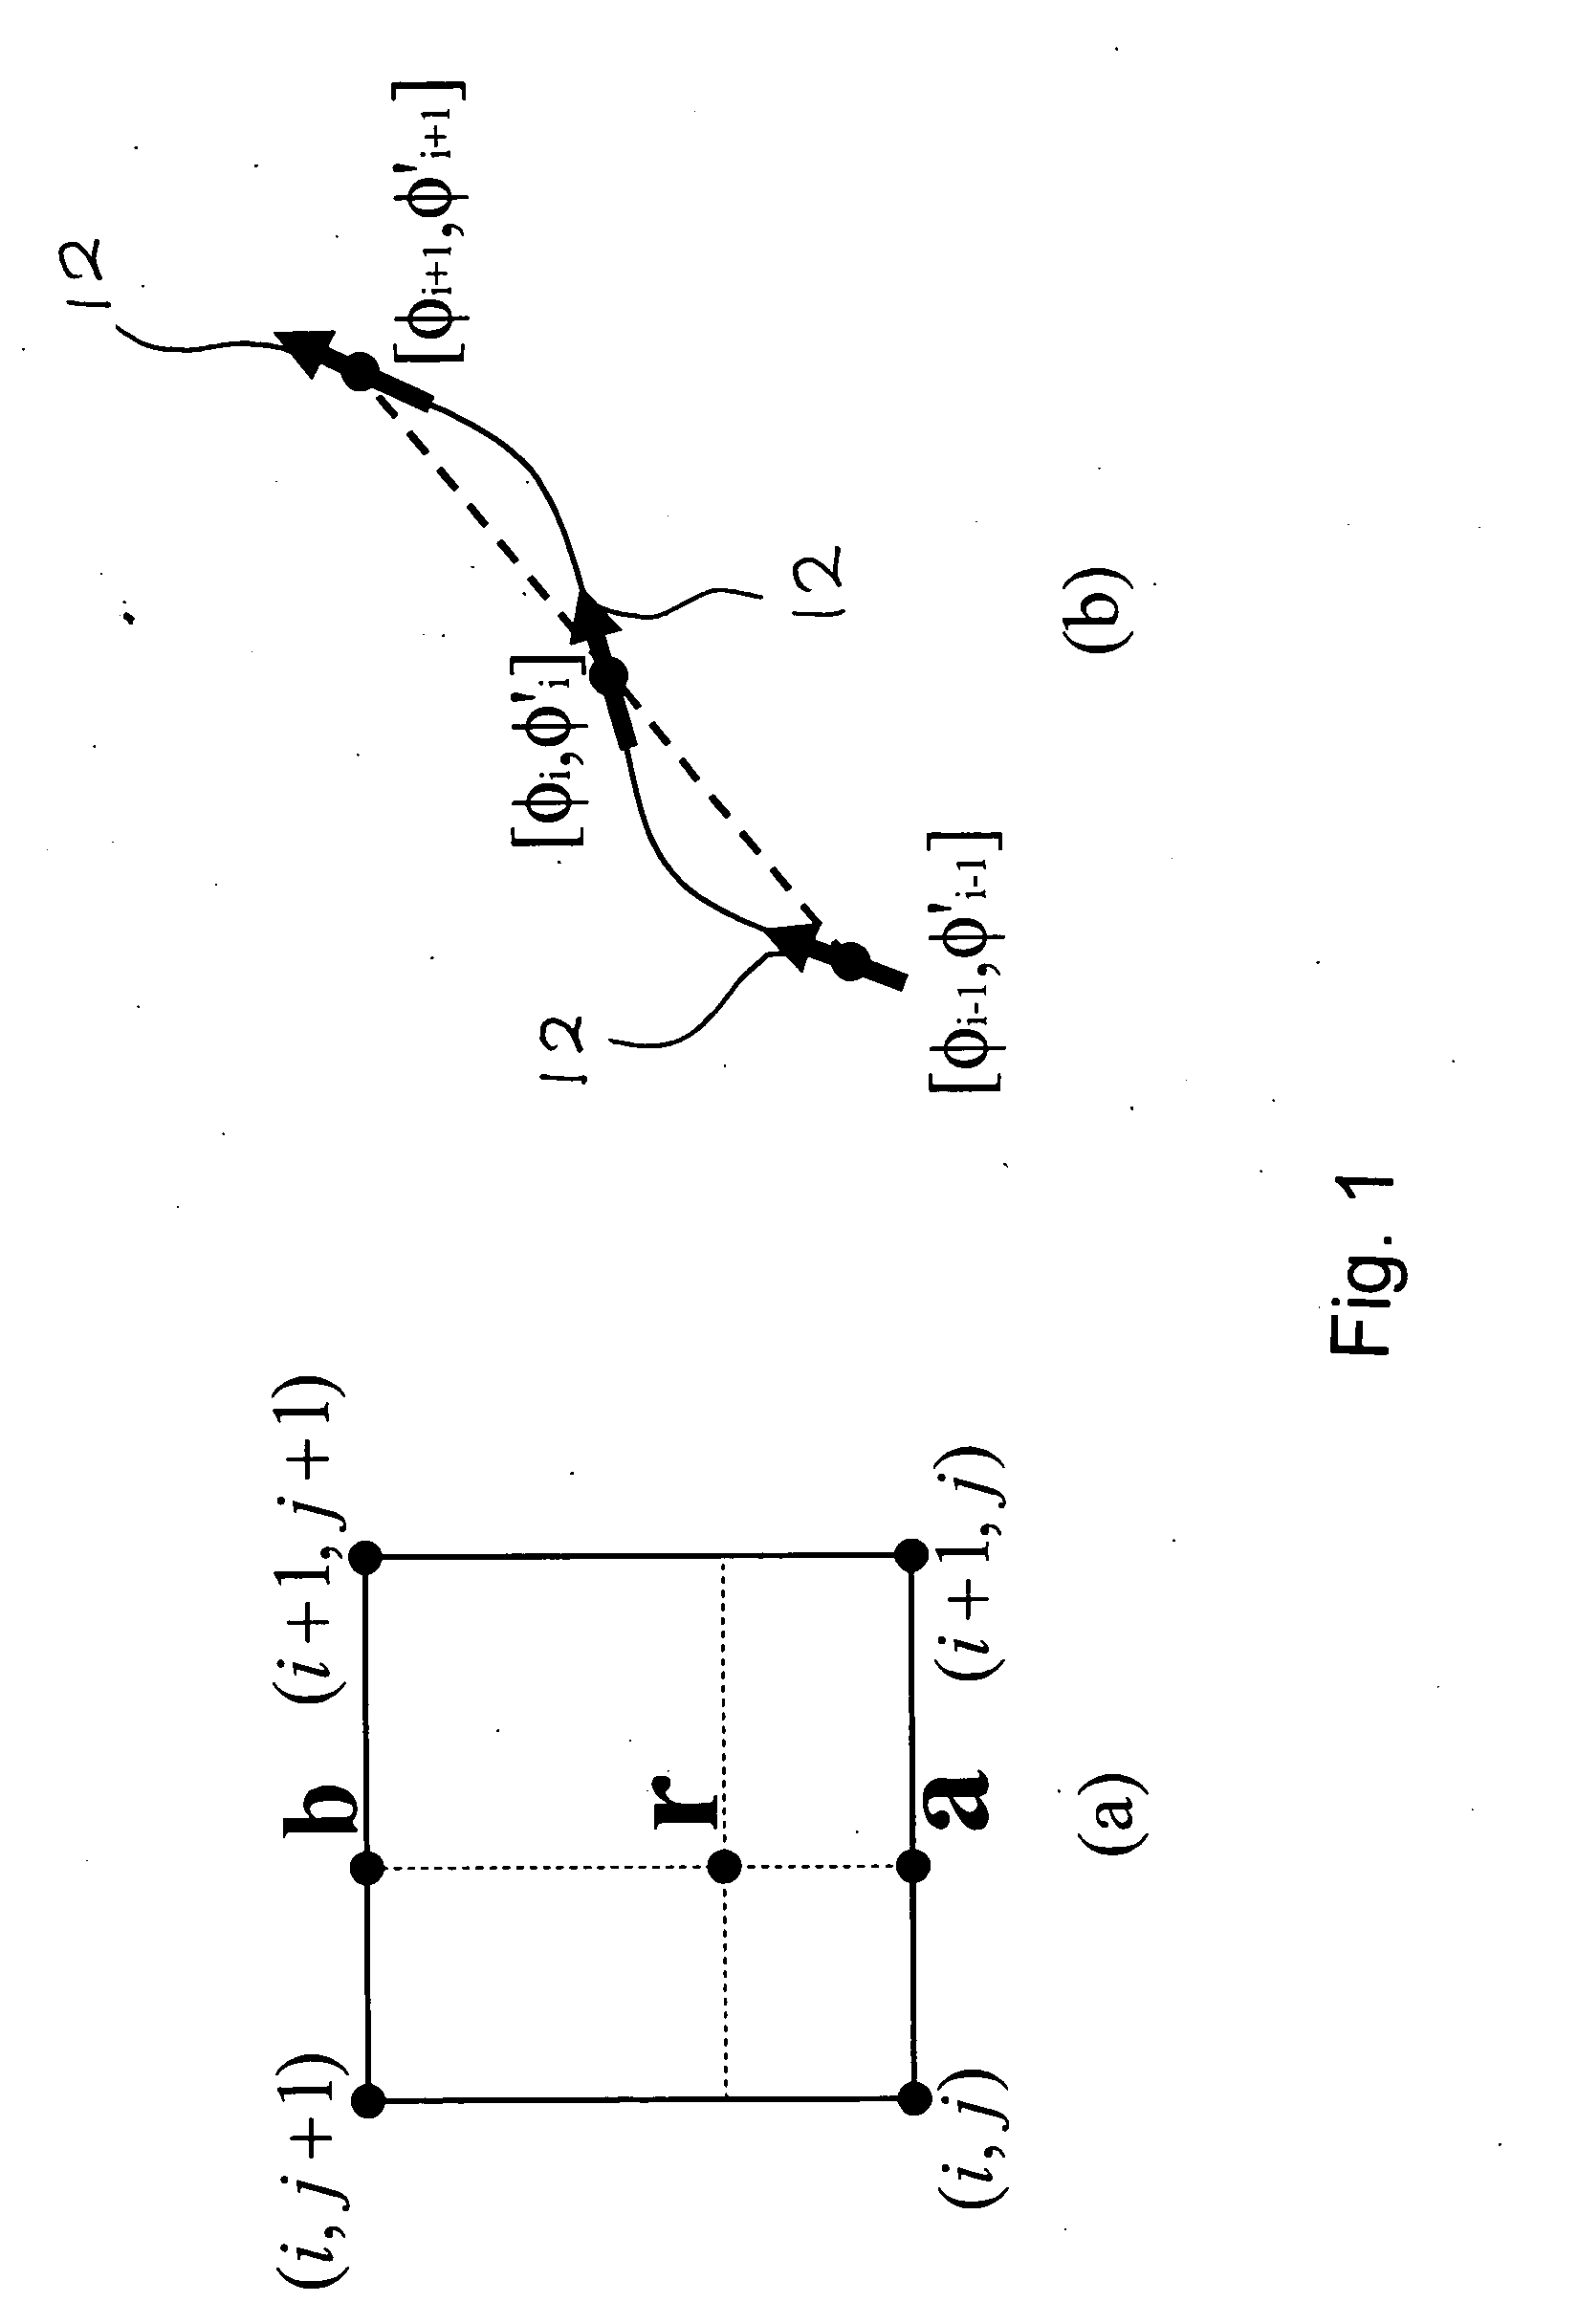 Method for simulating stable but non-dissipative water